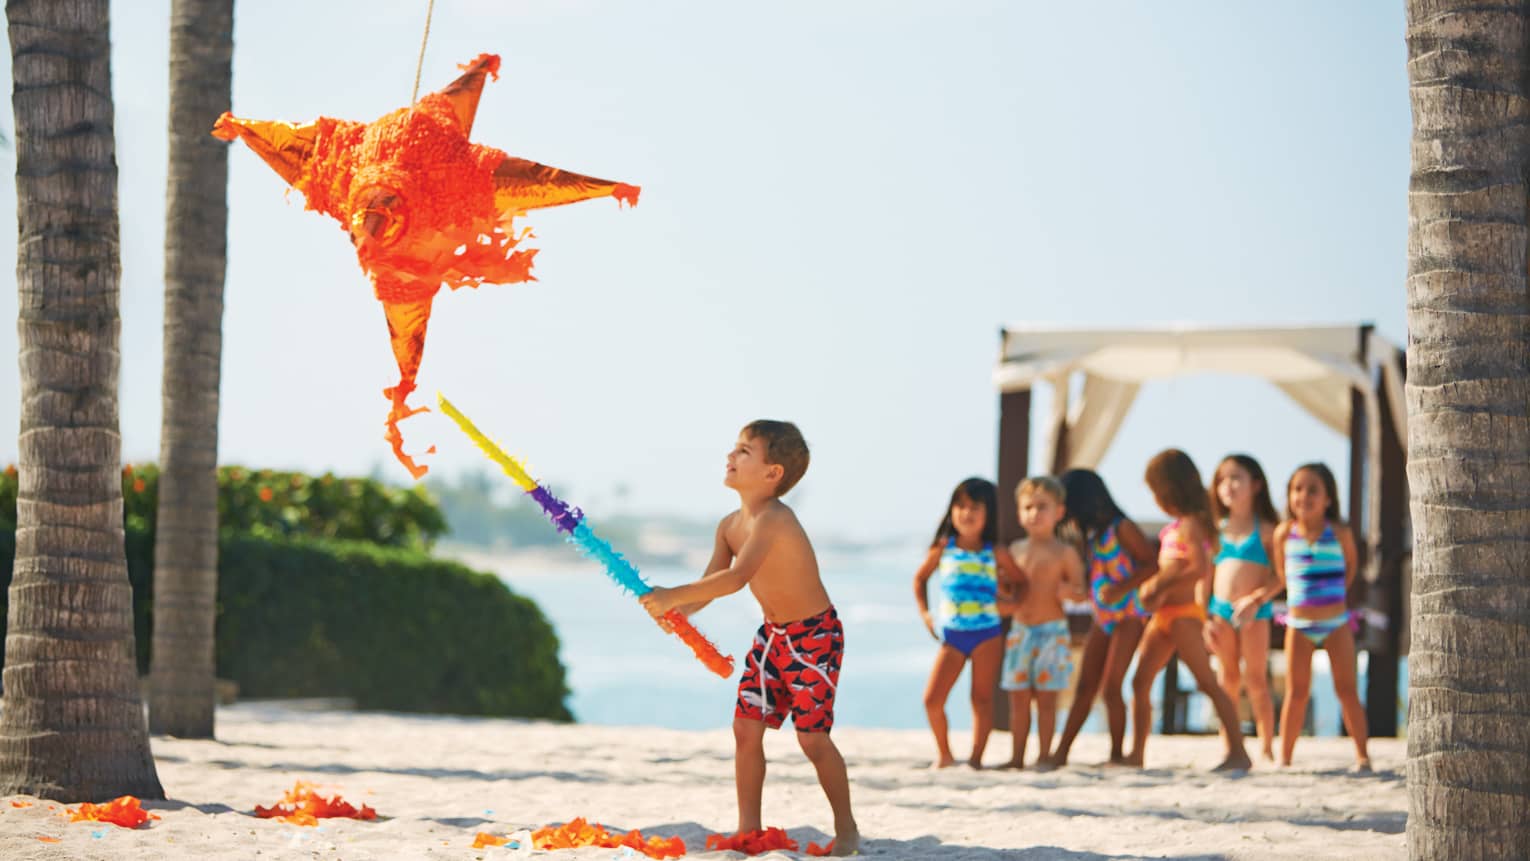 On a beach, a child swings a bat wrapped in vibrant crepe paper at a big orange star piñata; other children watch excitedly. 